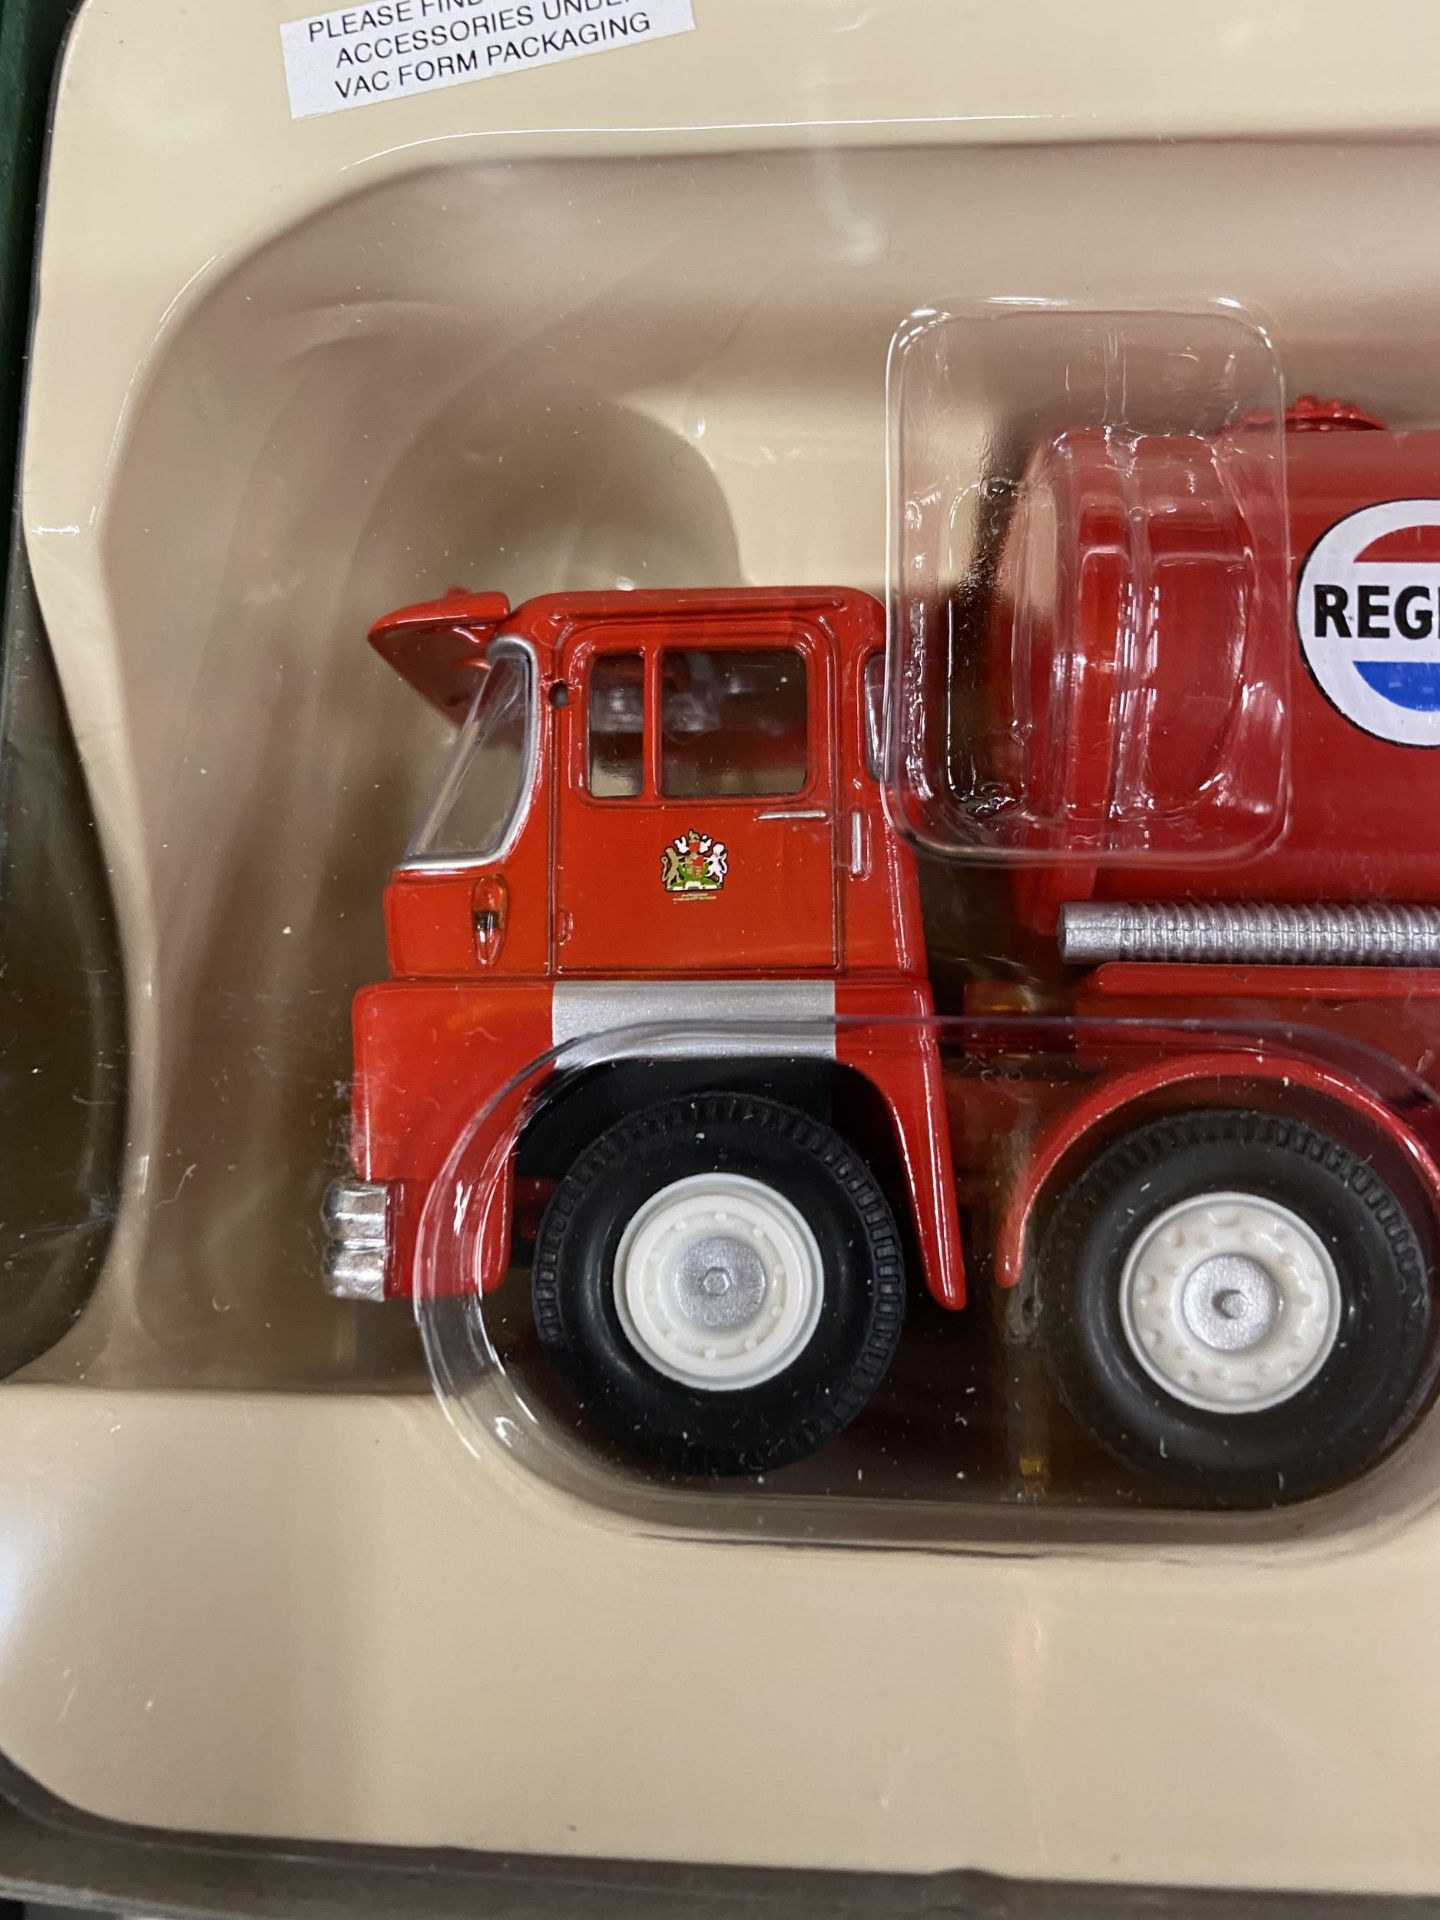 A BOXED CORGI MODEL FUELLING THE FIFTY GUY INVINCIBLE TANKER REGENT OIL COMPANY - Image 2 of 4